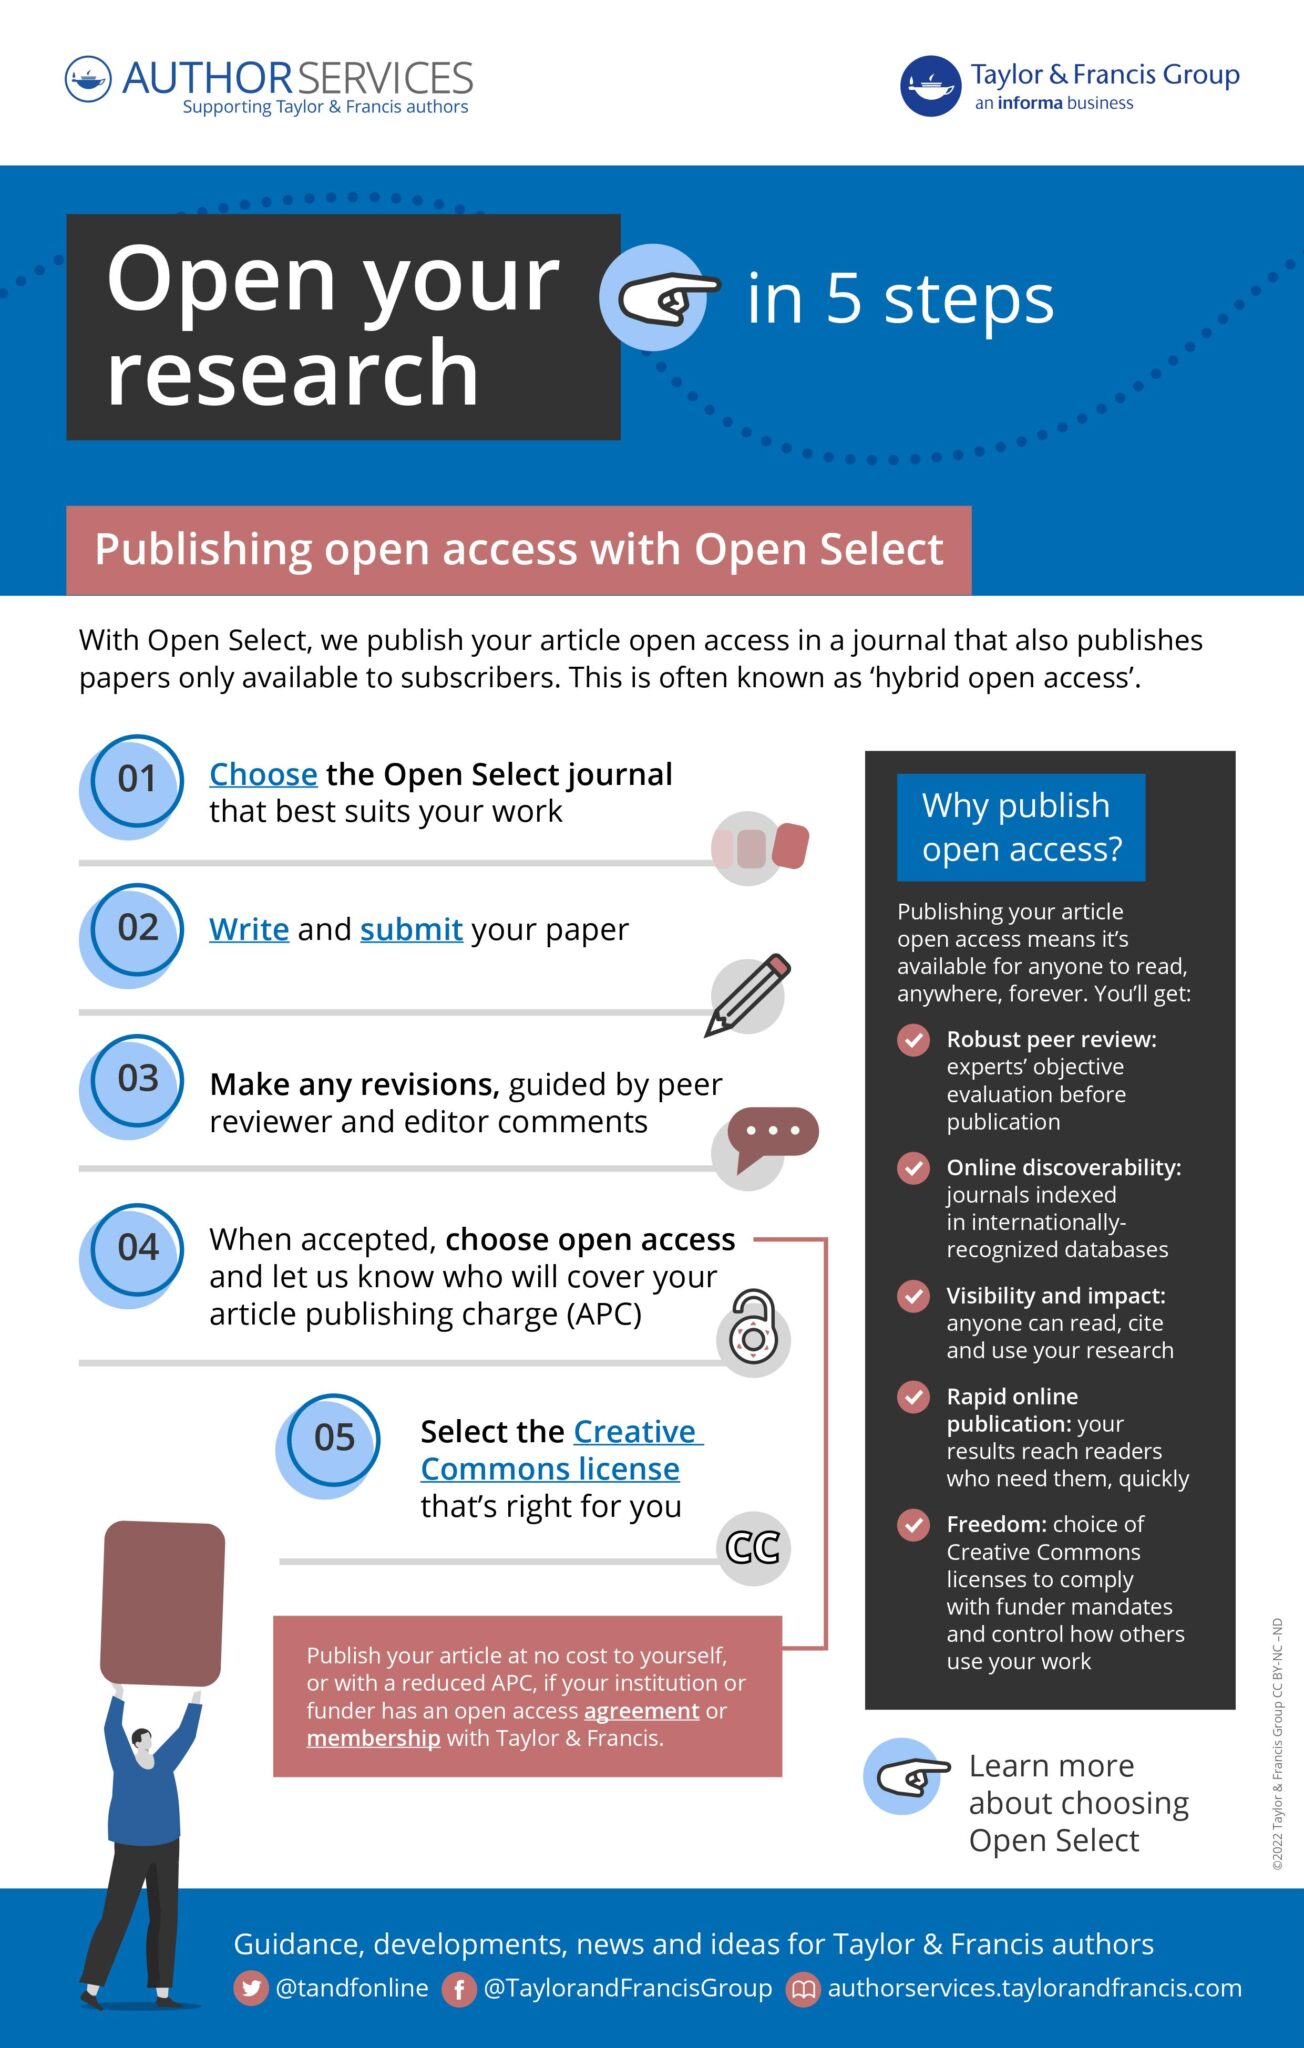 Infographic showing 5 steps to publish your research open access.